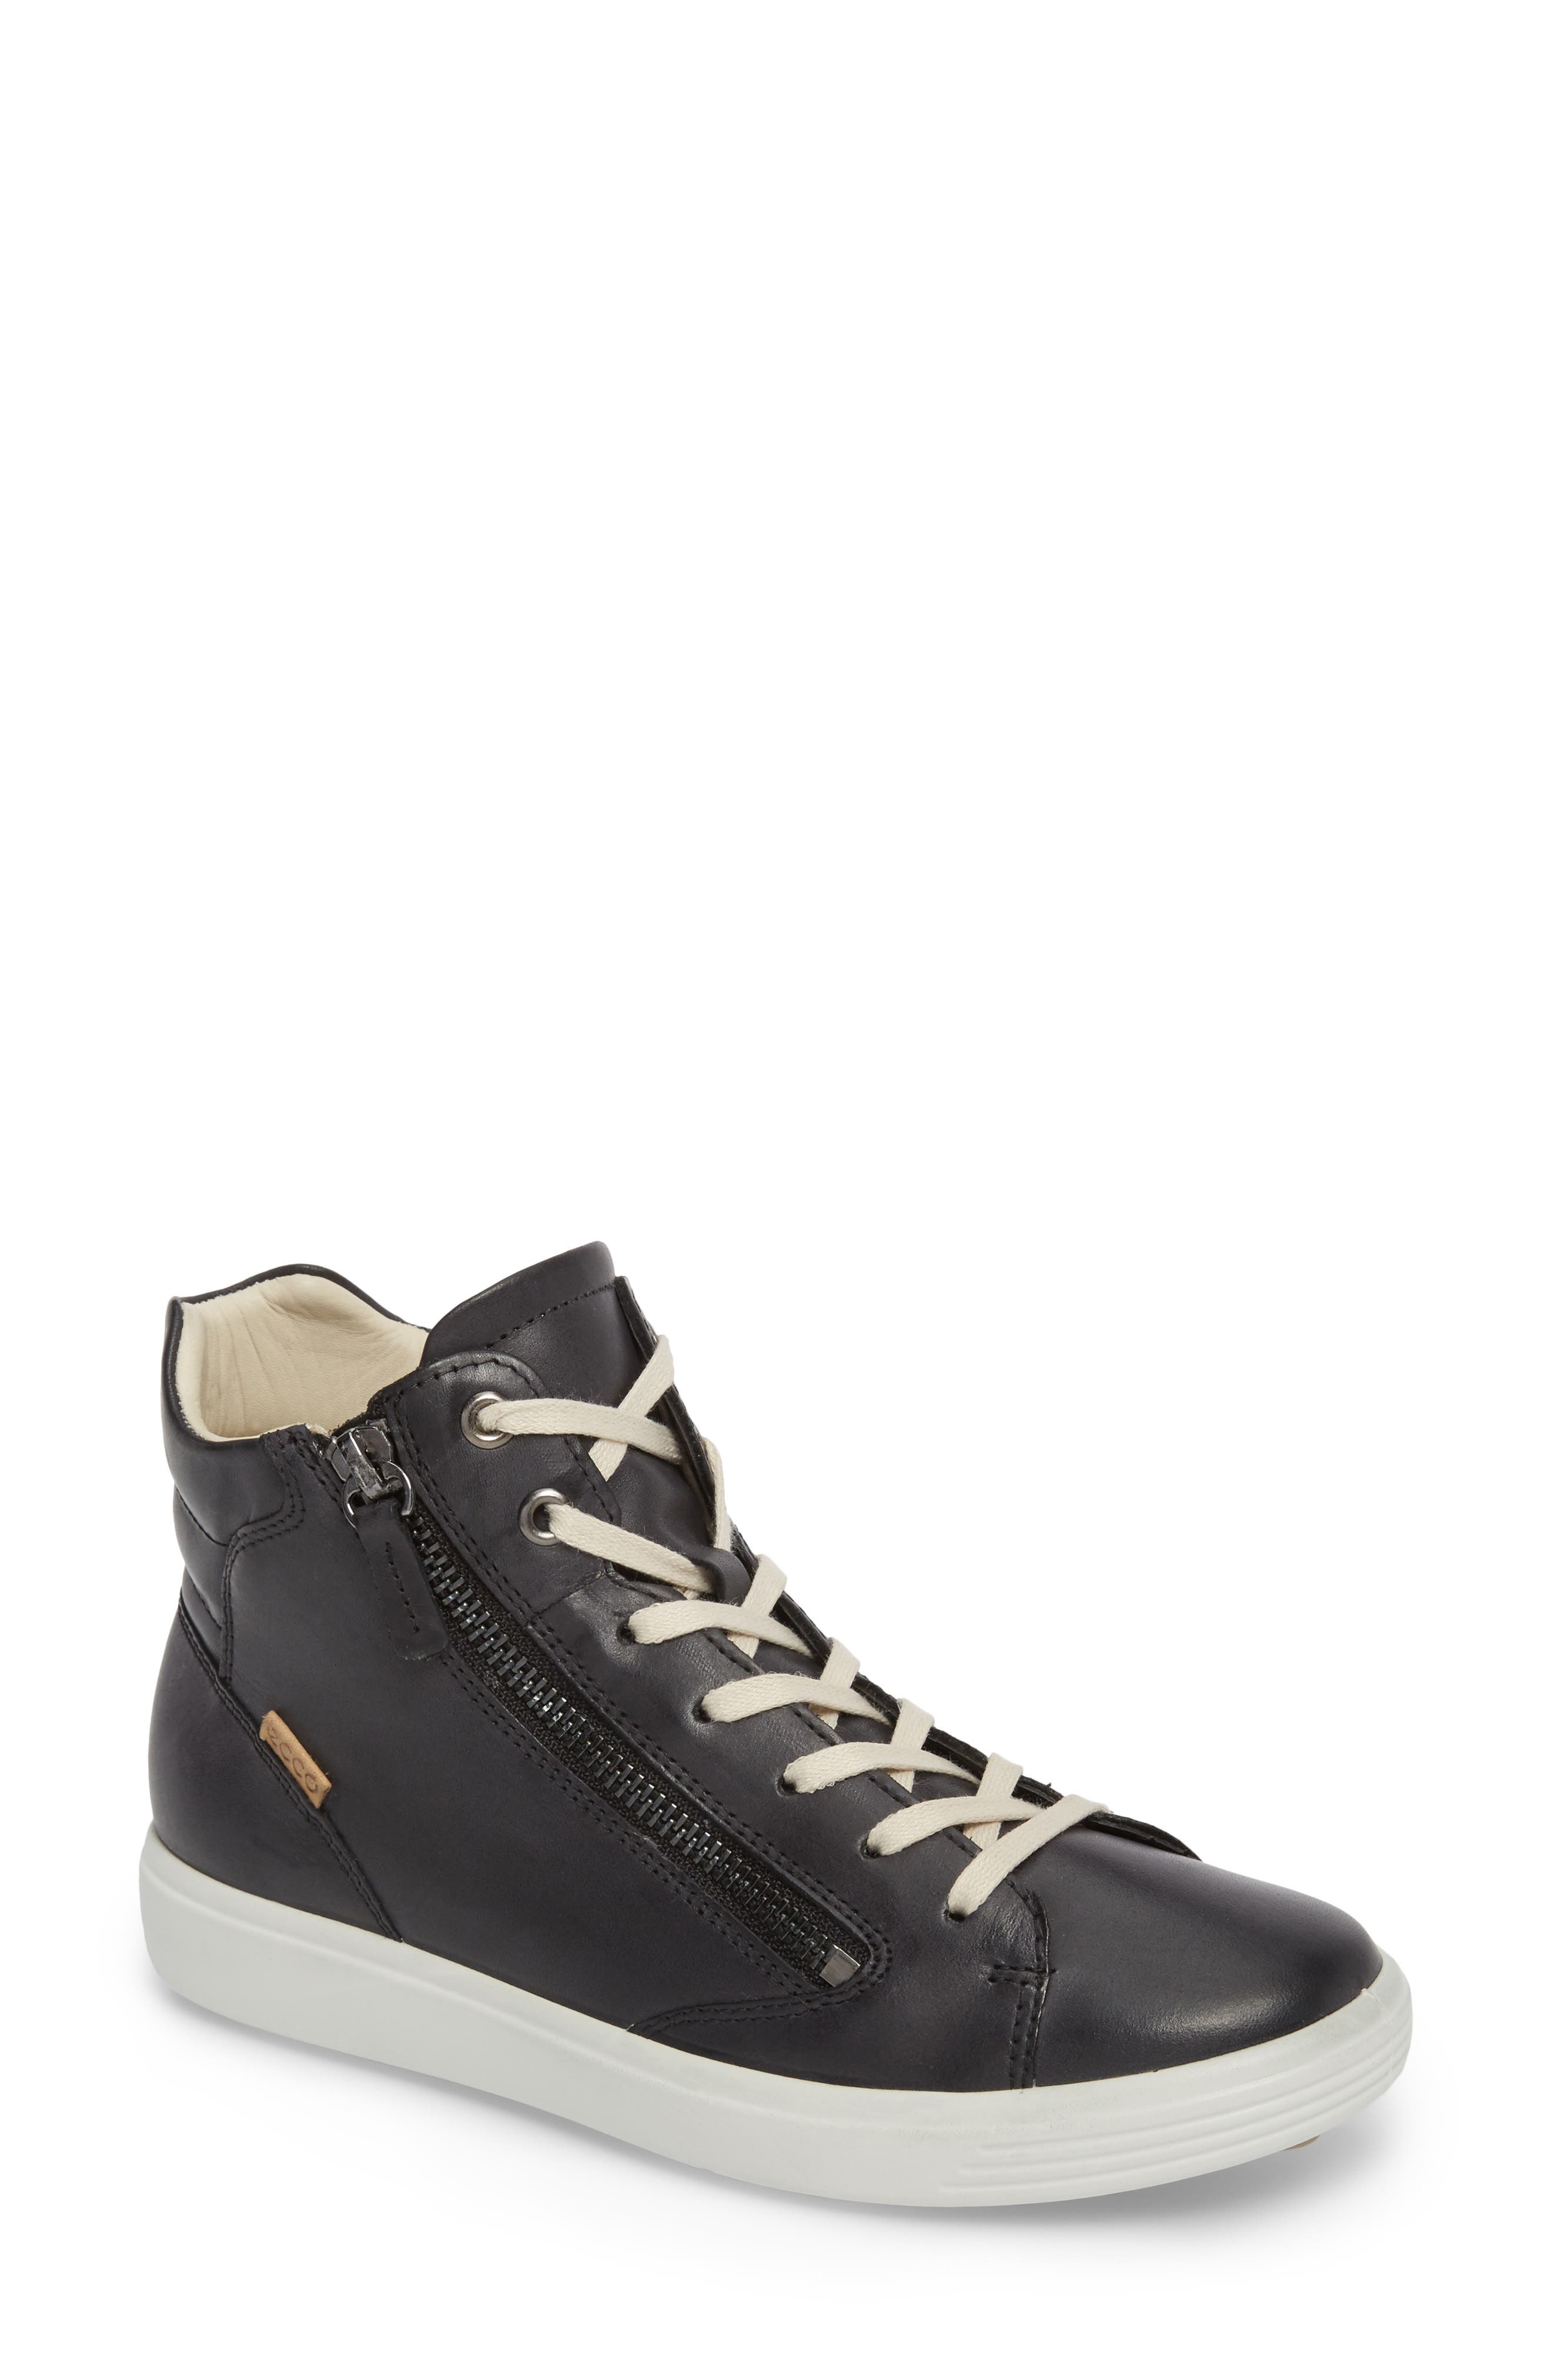 ecco leather high top sneakers